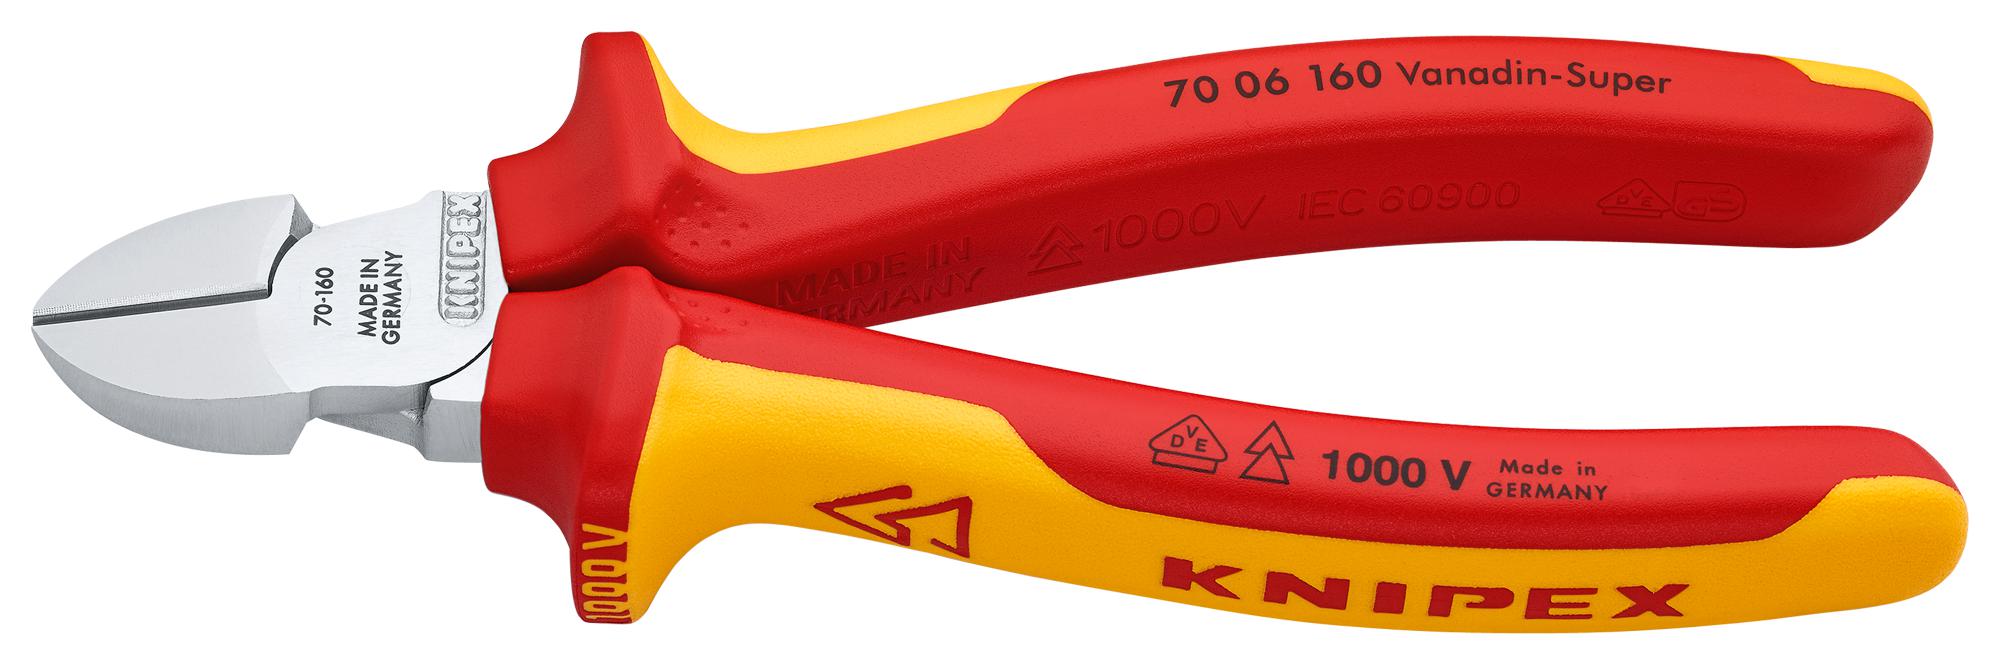 70 06 160 CUTTER, SIDE KNIPEX